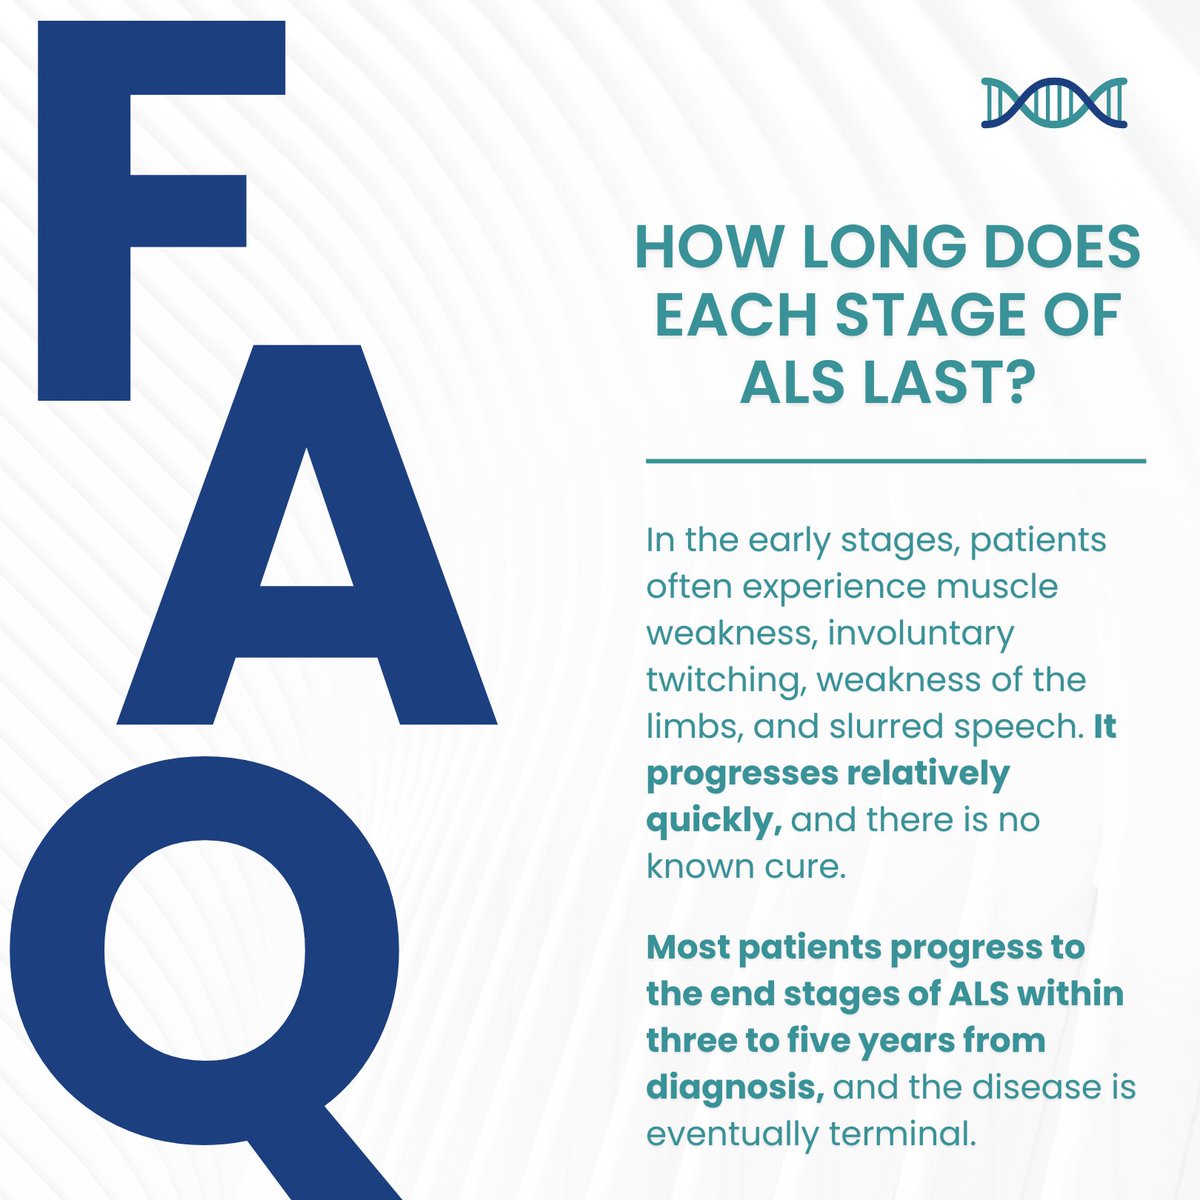 How long does each stage of ALS last? ⏳ Most patients progress to the end stages of ALS within three to five years from diagnosis, and the disease is eventually terminal. Read more ALS FAQs: targetals.org/faq/ #ALS #ALSFacts #ALSFAQ